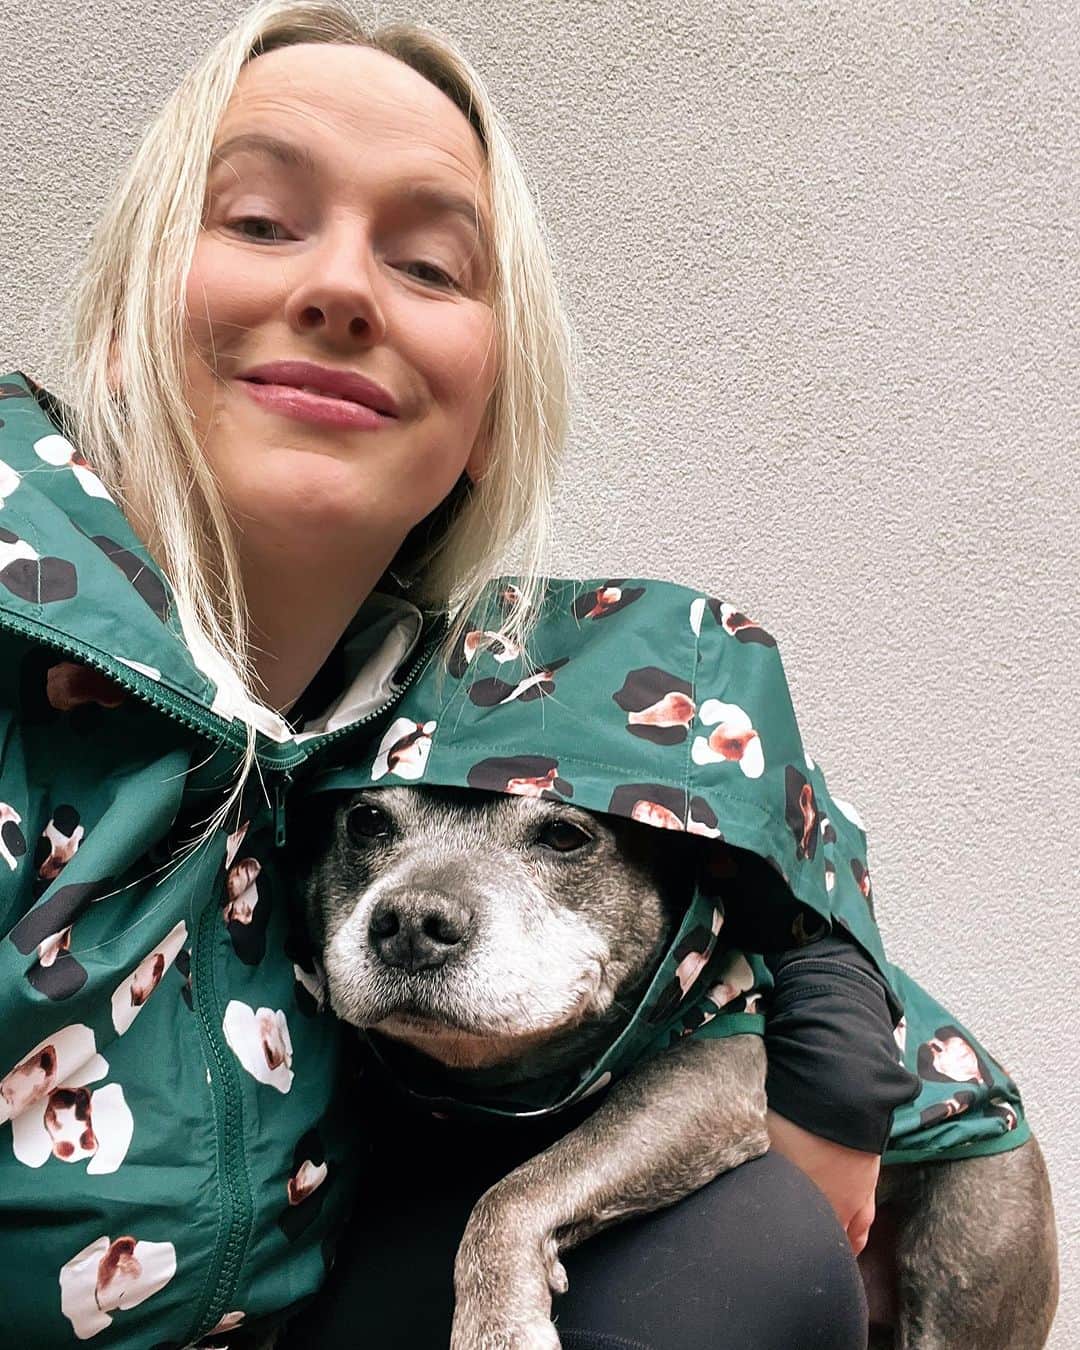 DARREN&PHILLIPのインスタグラム：「Philly refuses to walk in the rain unless he has his raincoat on. Sorry that was a lie. Philly refuses to walk in the rain regardless of whether or not he’s wearing a raincoat. Sorry that was also a lie. Philly refuses to walk almost always, regardless of the weather 🤣🤣 But for most of you, this raincoat would really do the trick! 😂☔️🌧️🐶  Available tomorrow 11am AEST! @darrenandphillip」